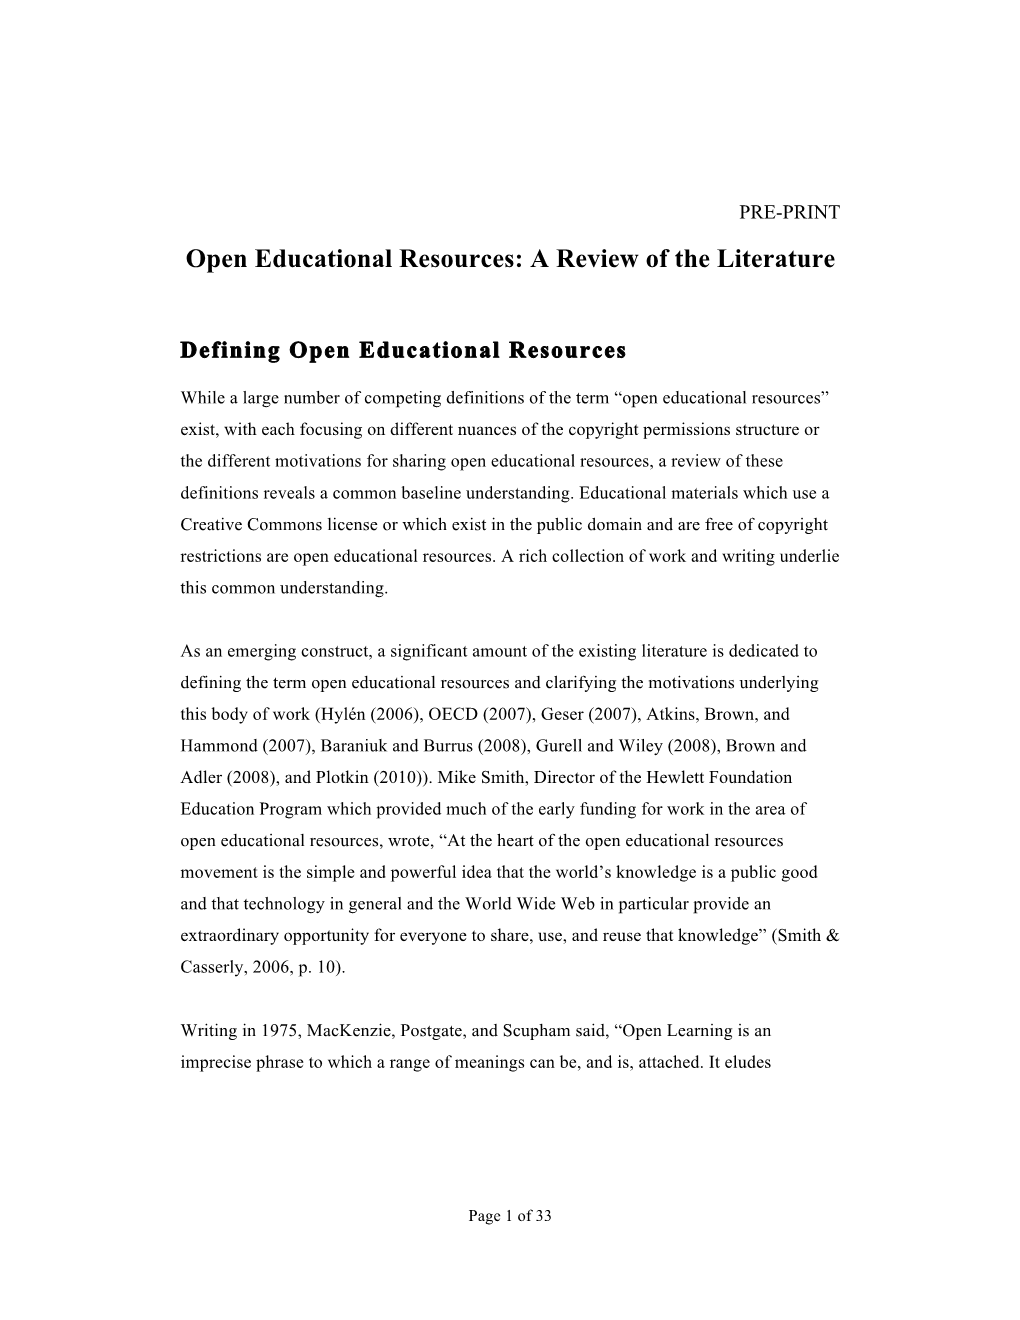 Open Educational Resources: a Review of the Literature